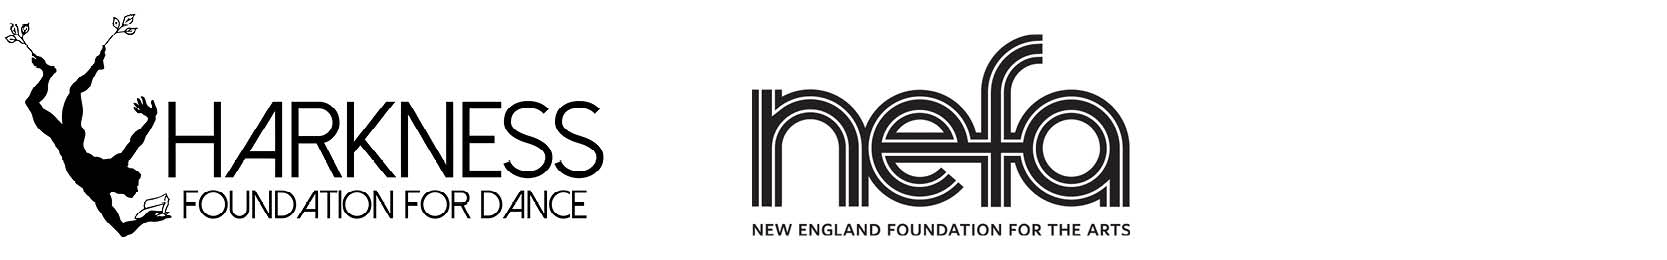 Logos: Harkness Foundation for Dance & NEFA New England Foundation for the Arts